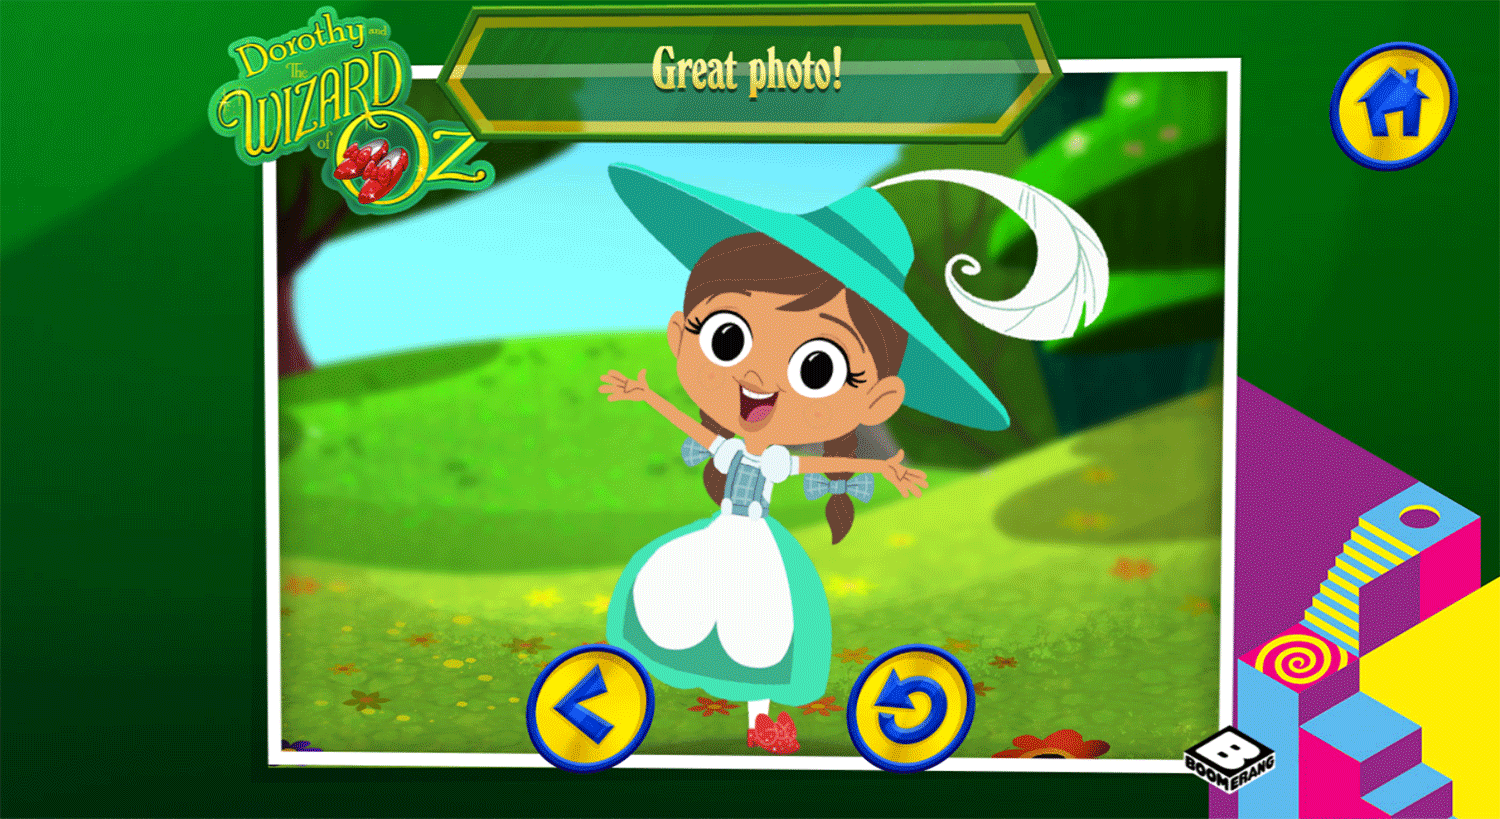 Dorothy and the Wizard of Oz Dress Up Game Final Layout Screenshot.